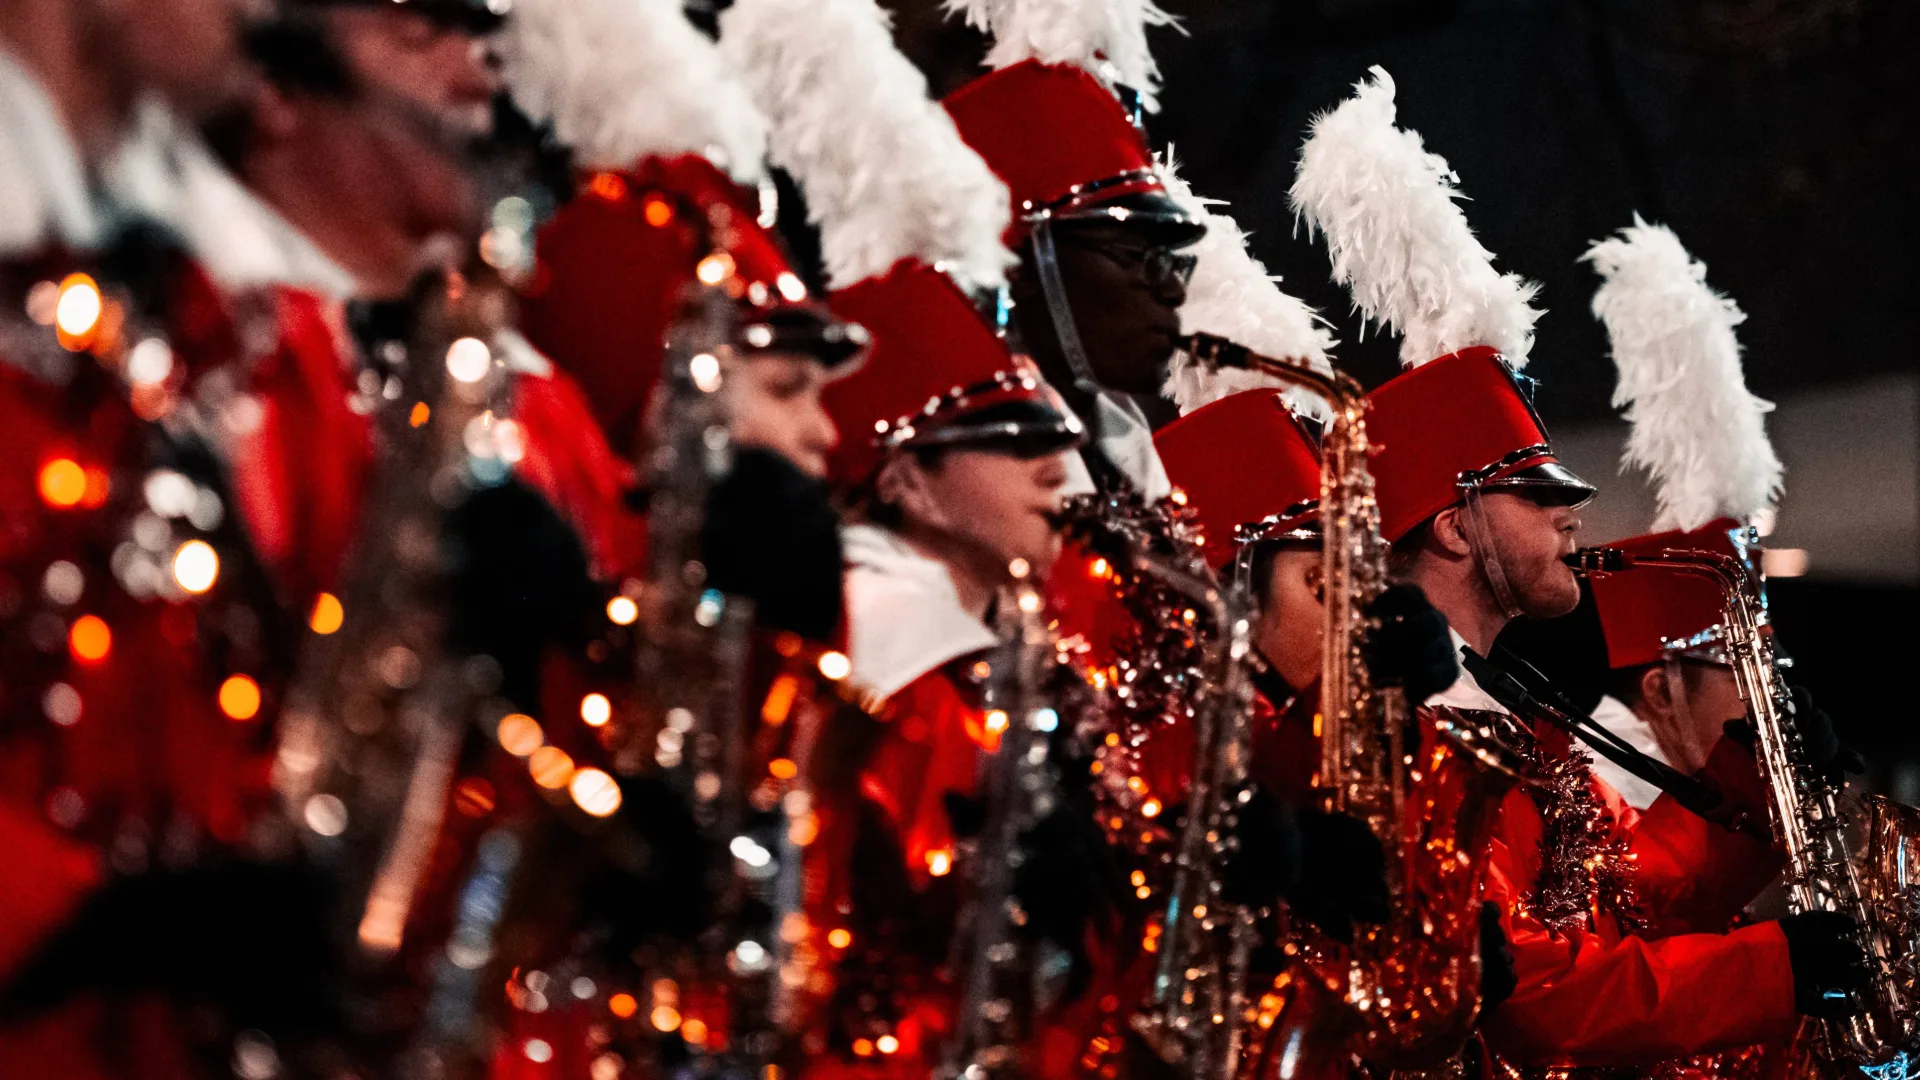 Image of a high school brass band wearing red costumes